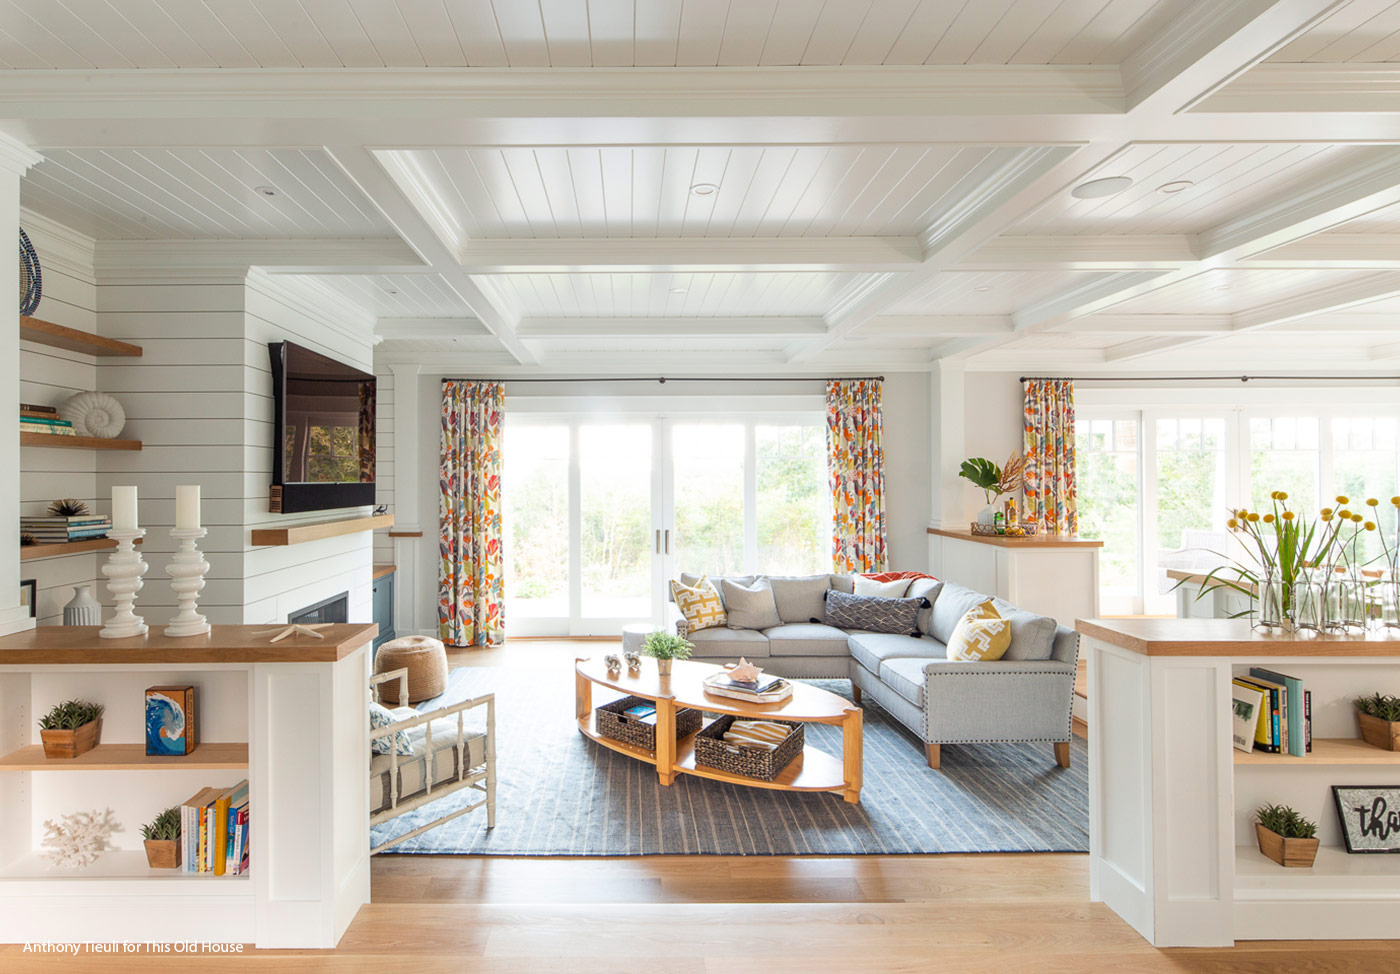 Wood accents throughout the open living space.